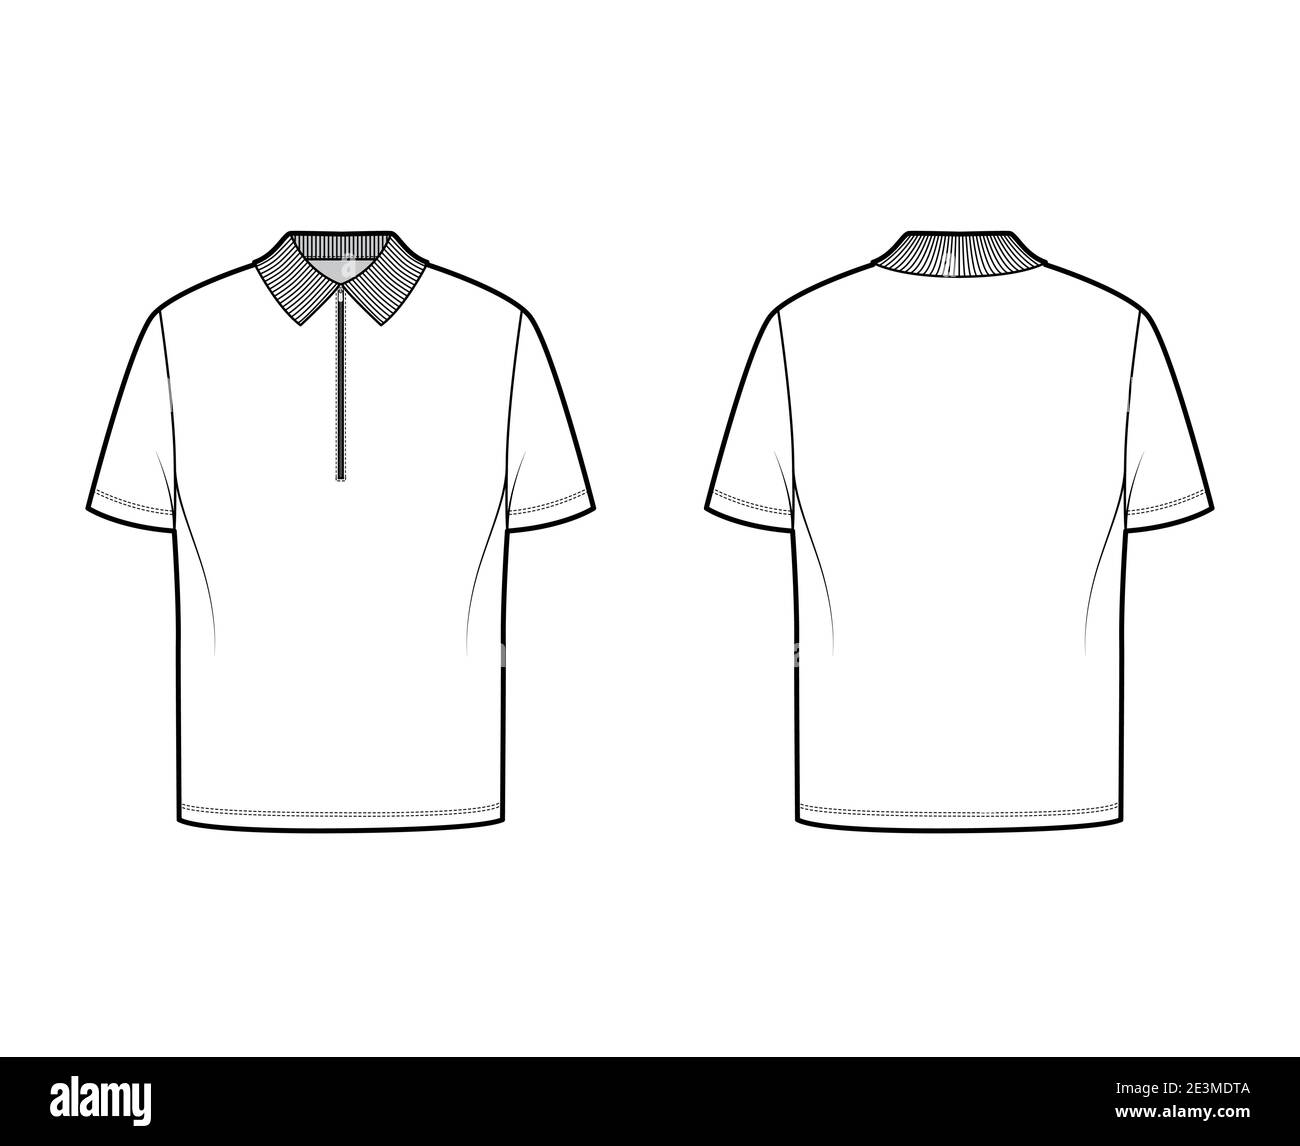 Shirt zip polo technical fashion illustration with short sleeves, tunic length, henley neck, oversized, flat knit collar. Apparel top outwear template front, back, white color. Women men CAD mockup Stock Vector